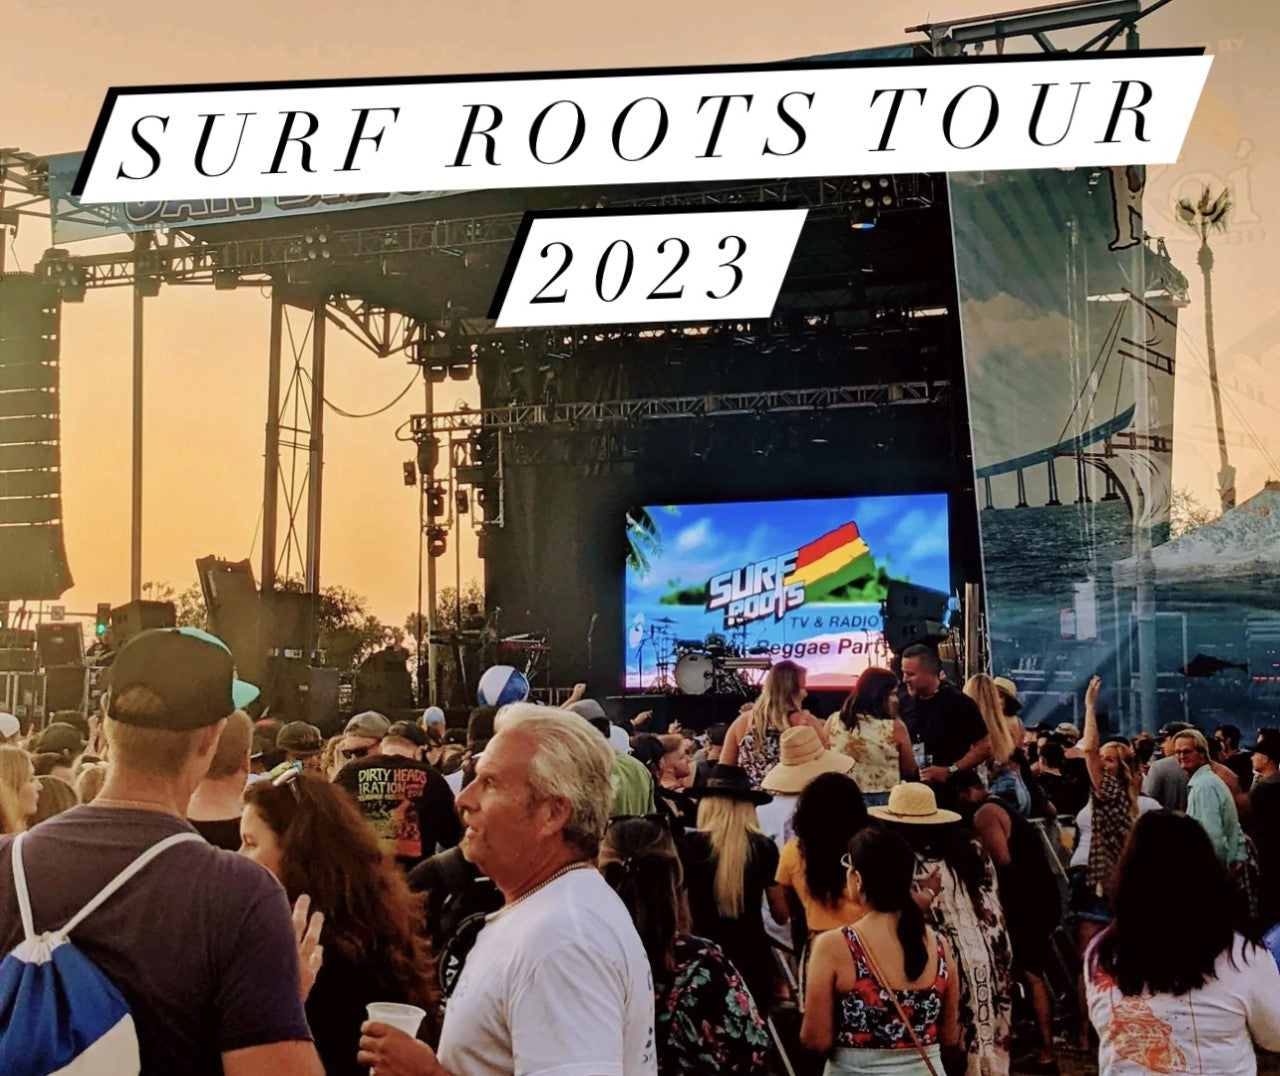 Surf Roots Tour 2023 - Where to find us